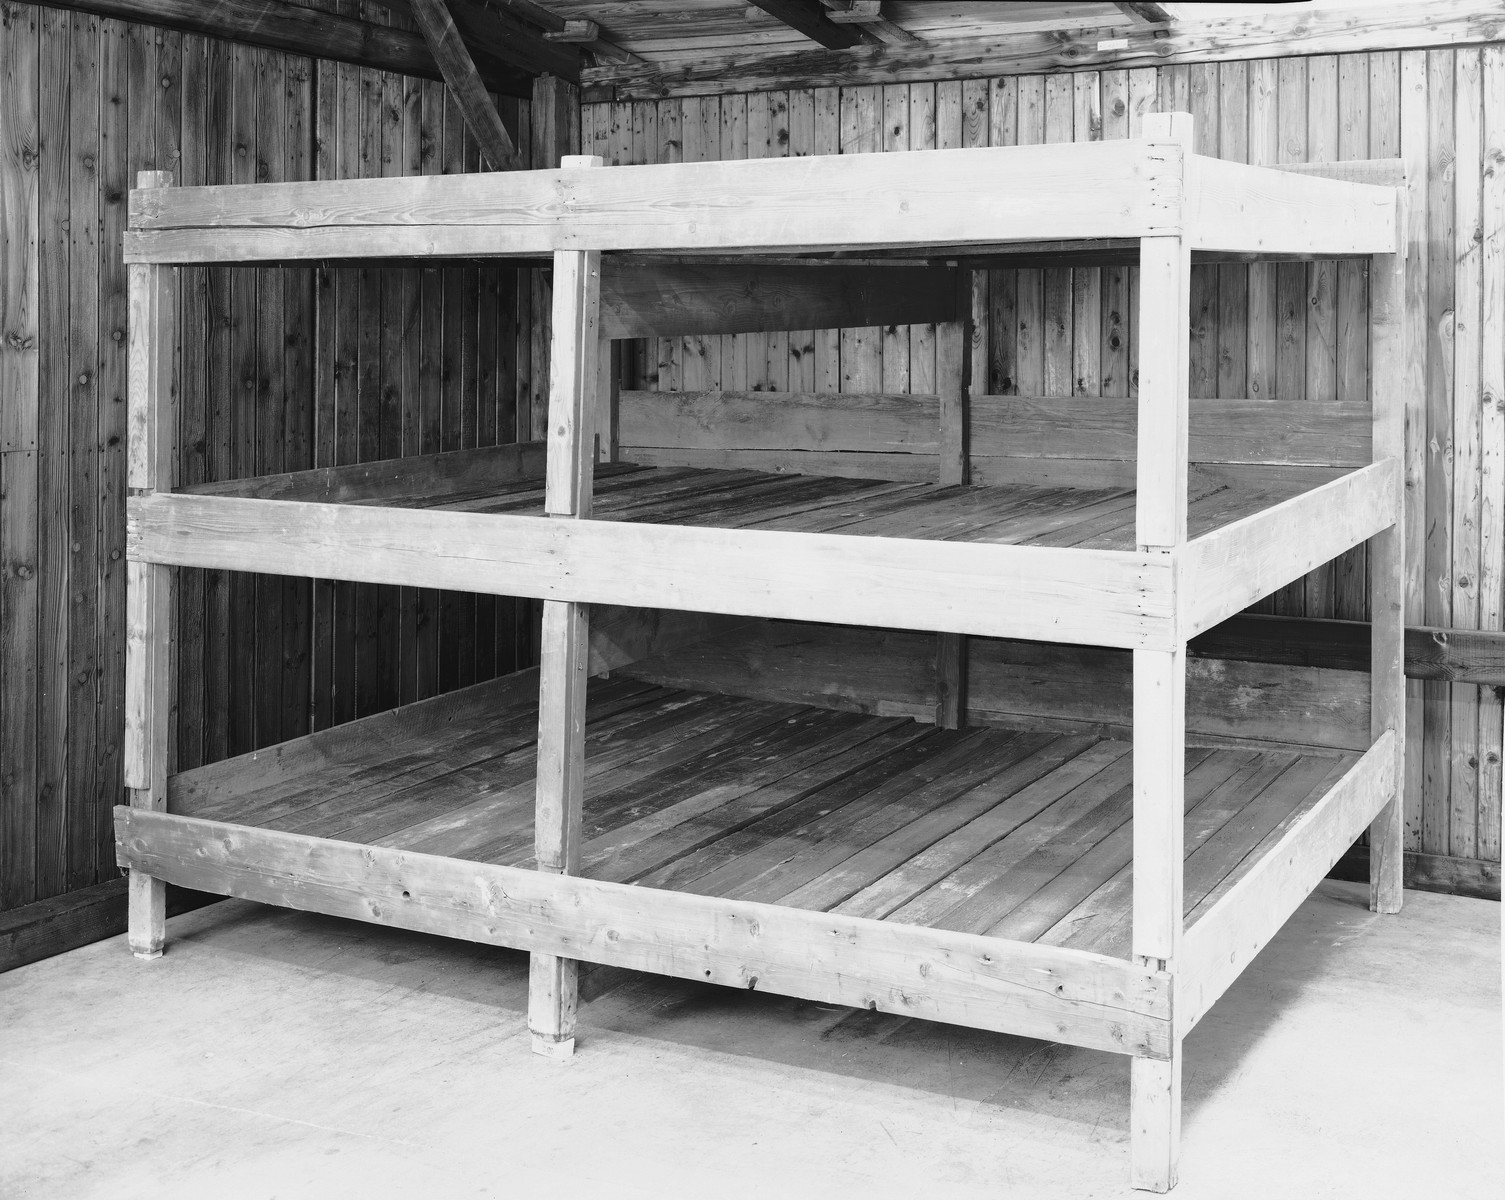 View of the reconstructed bunks from a barracks in Auschwitz on display in the permanent exhibition at the U.S. Holocaust Memorial Museum.